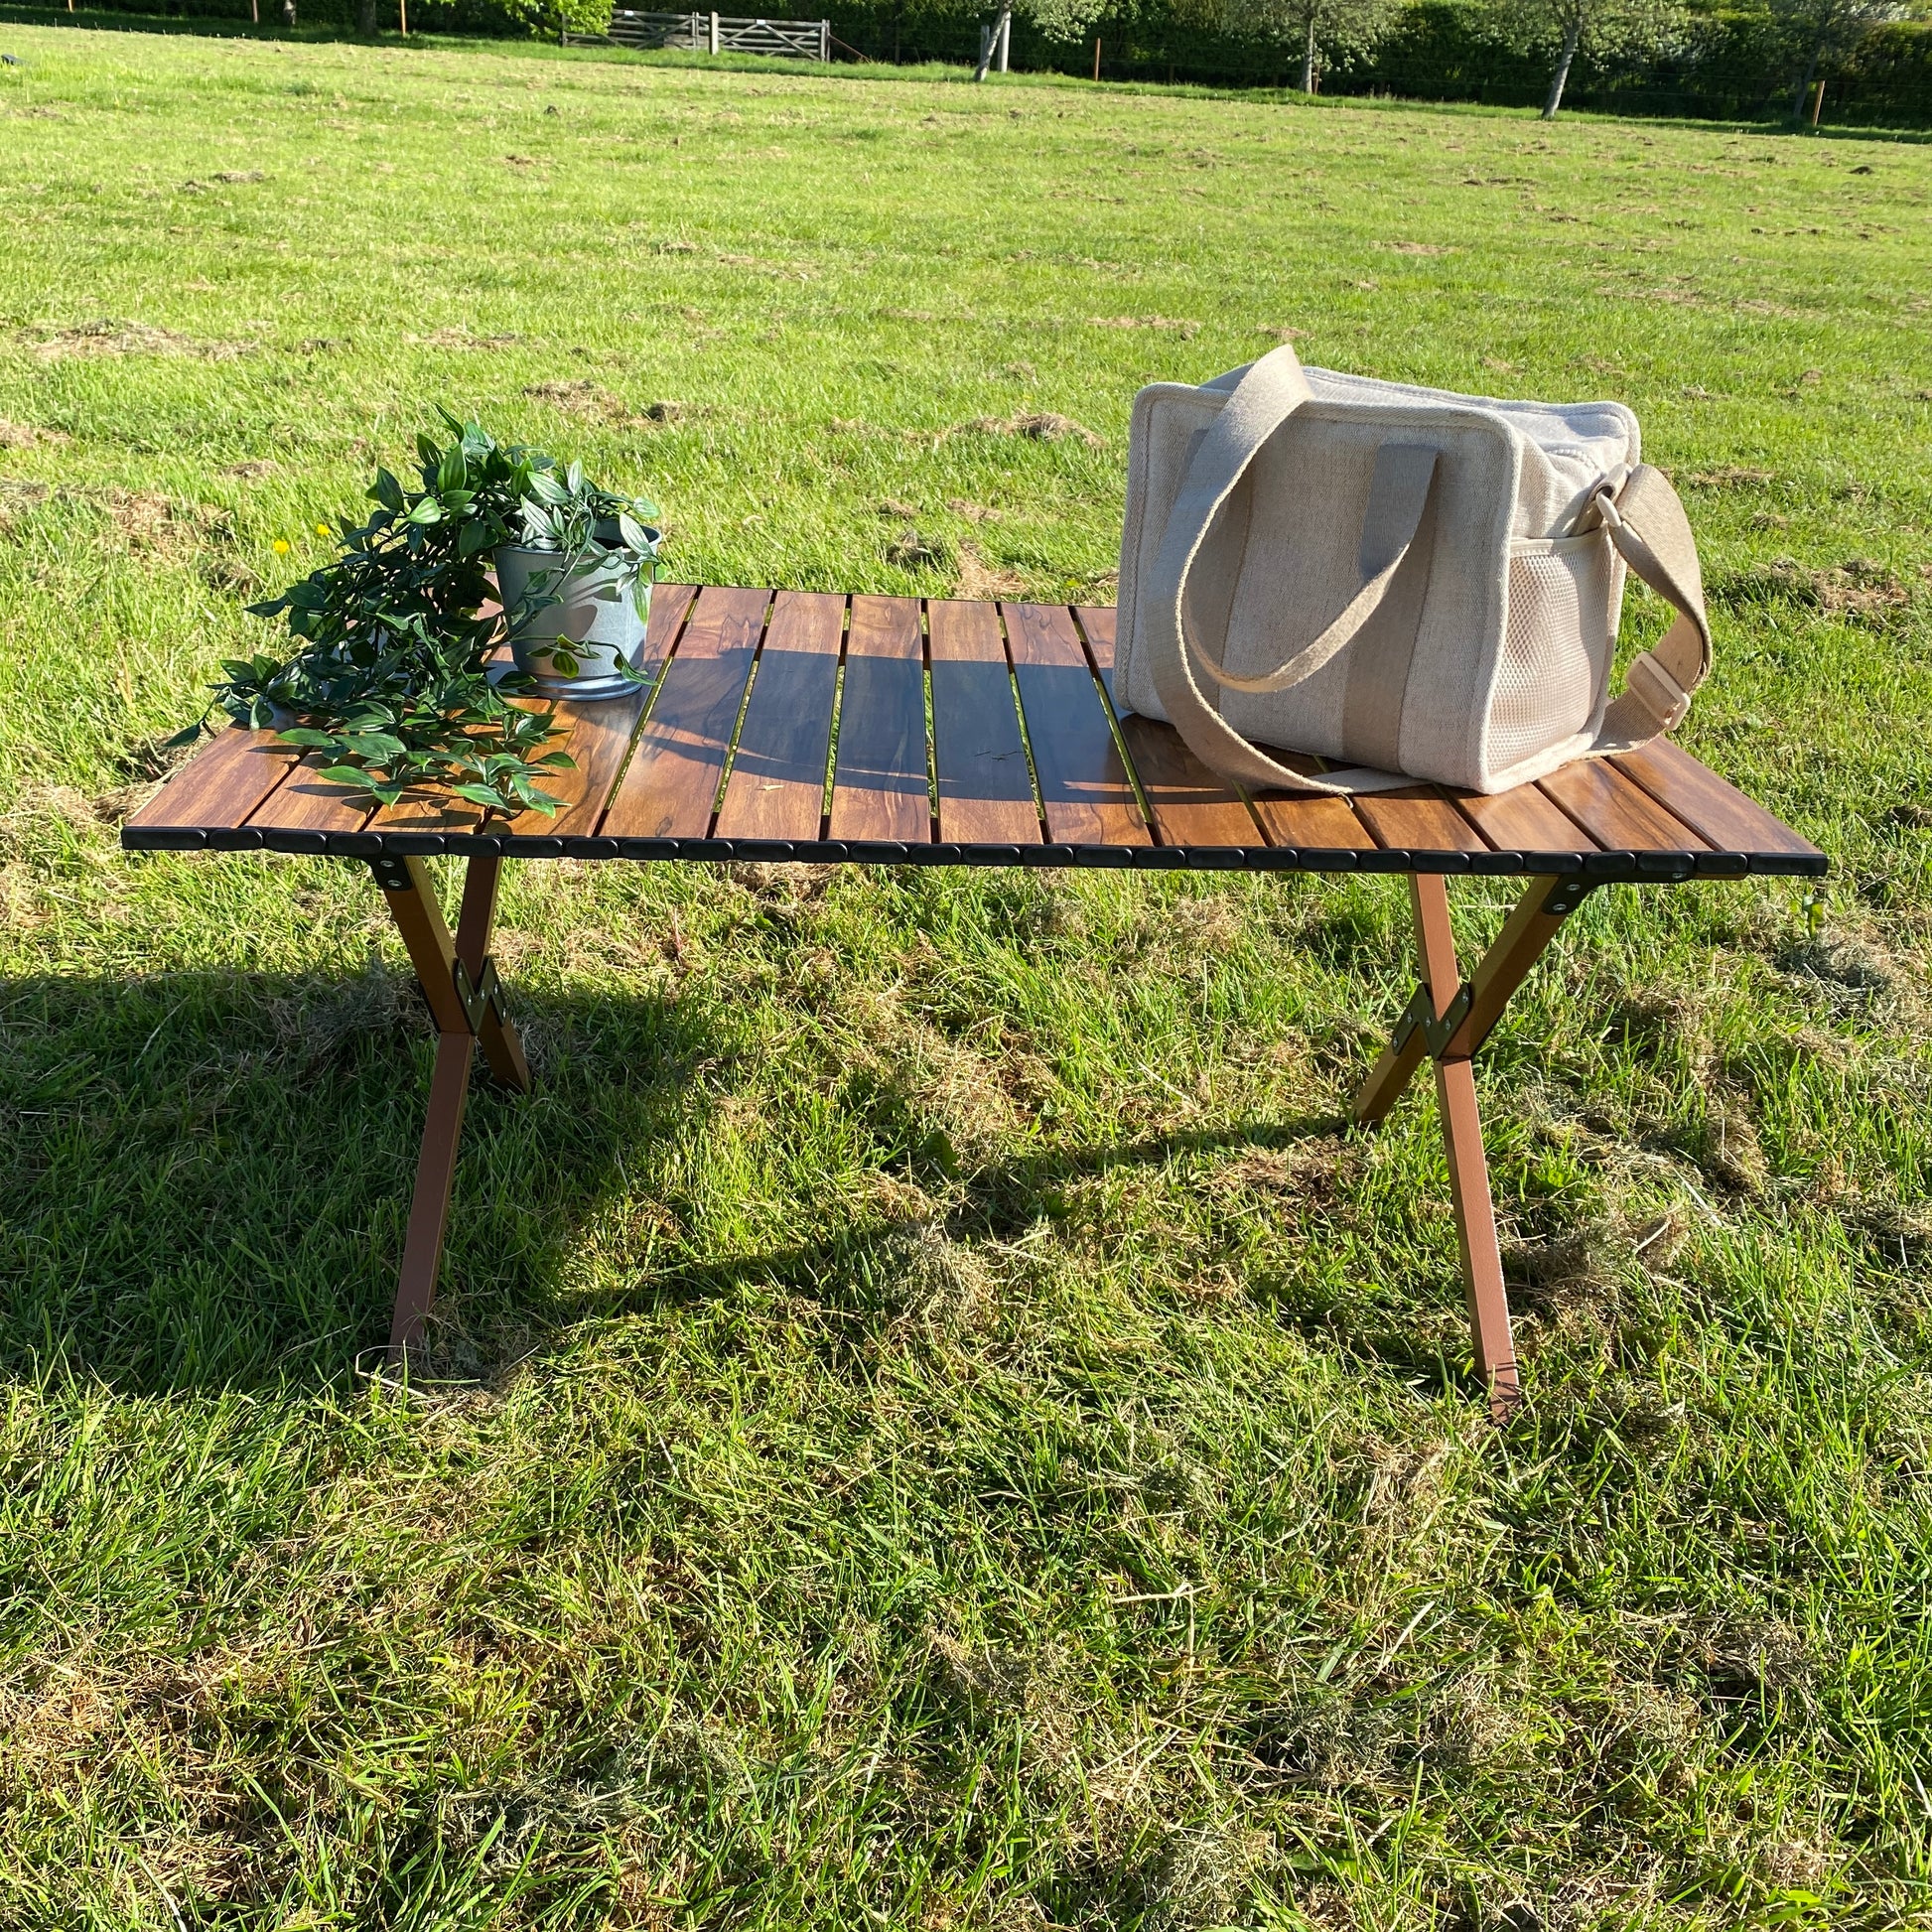 A lightweight, foldable, portable picnic table by The Well Heeled Hippy. Perfect for camping, glamping and picnicing